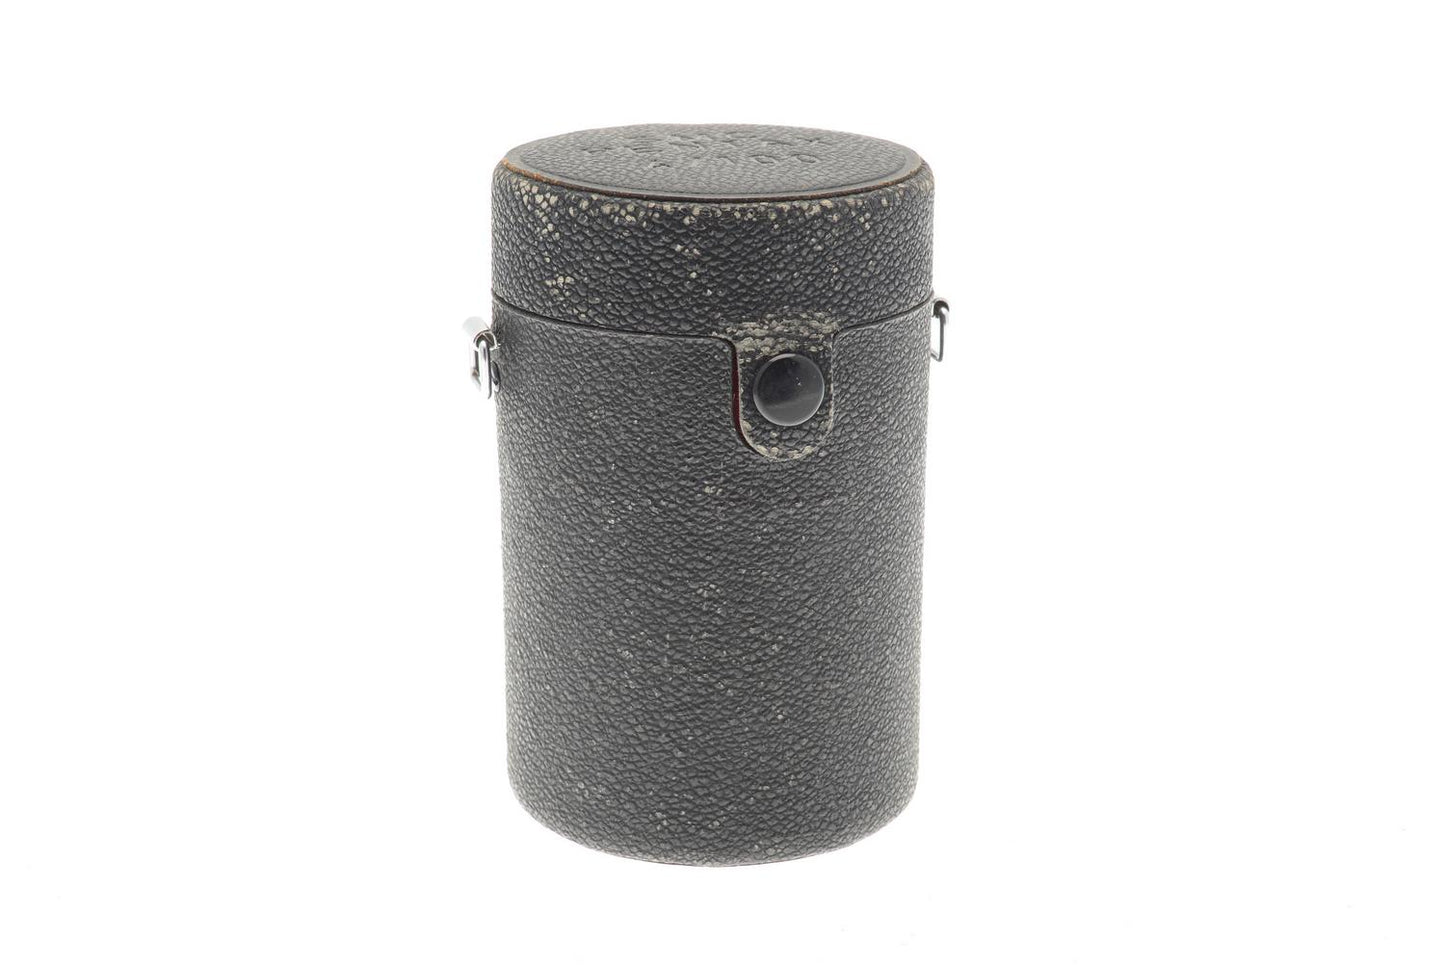 Pentax Lens Case for 100mm f4 SMC - Accessory